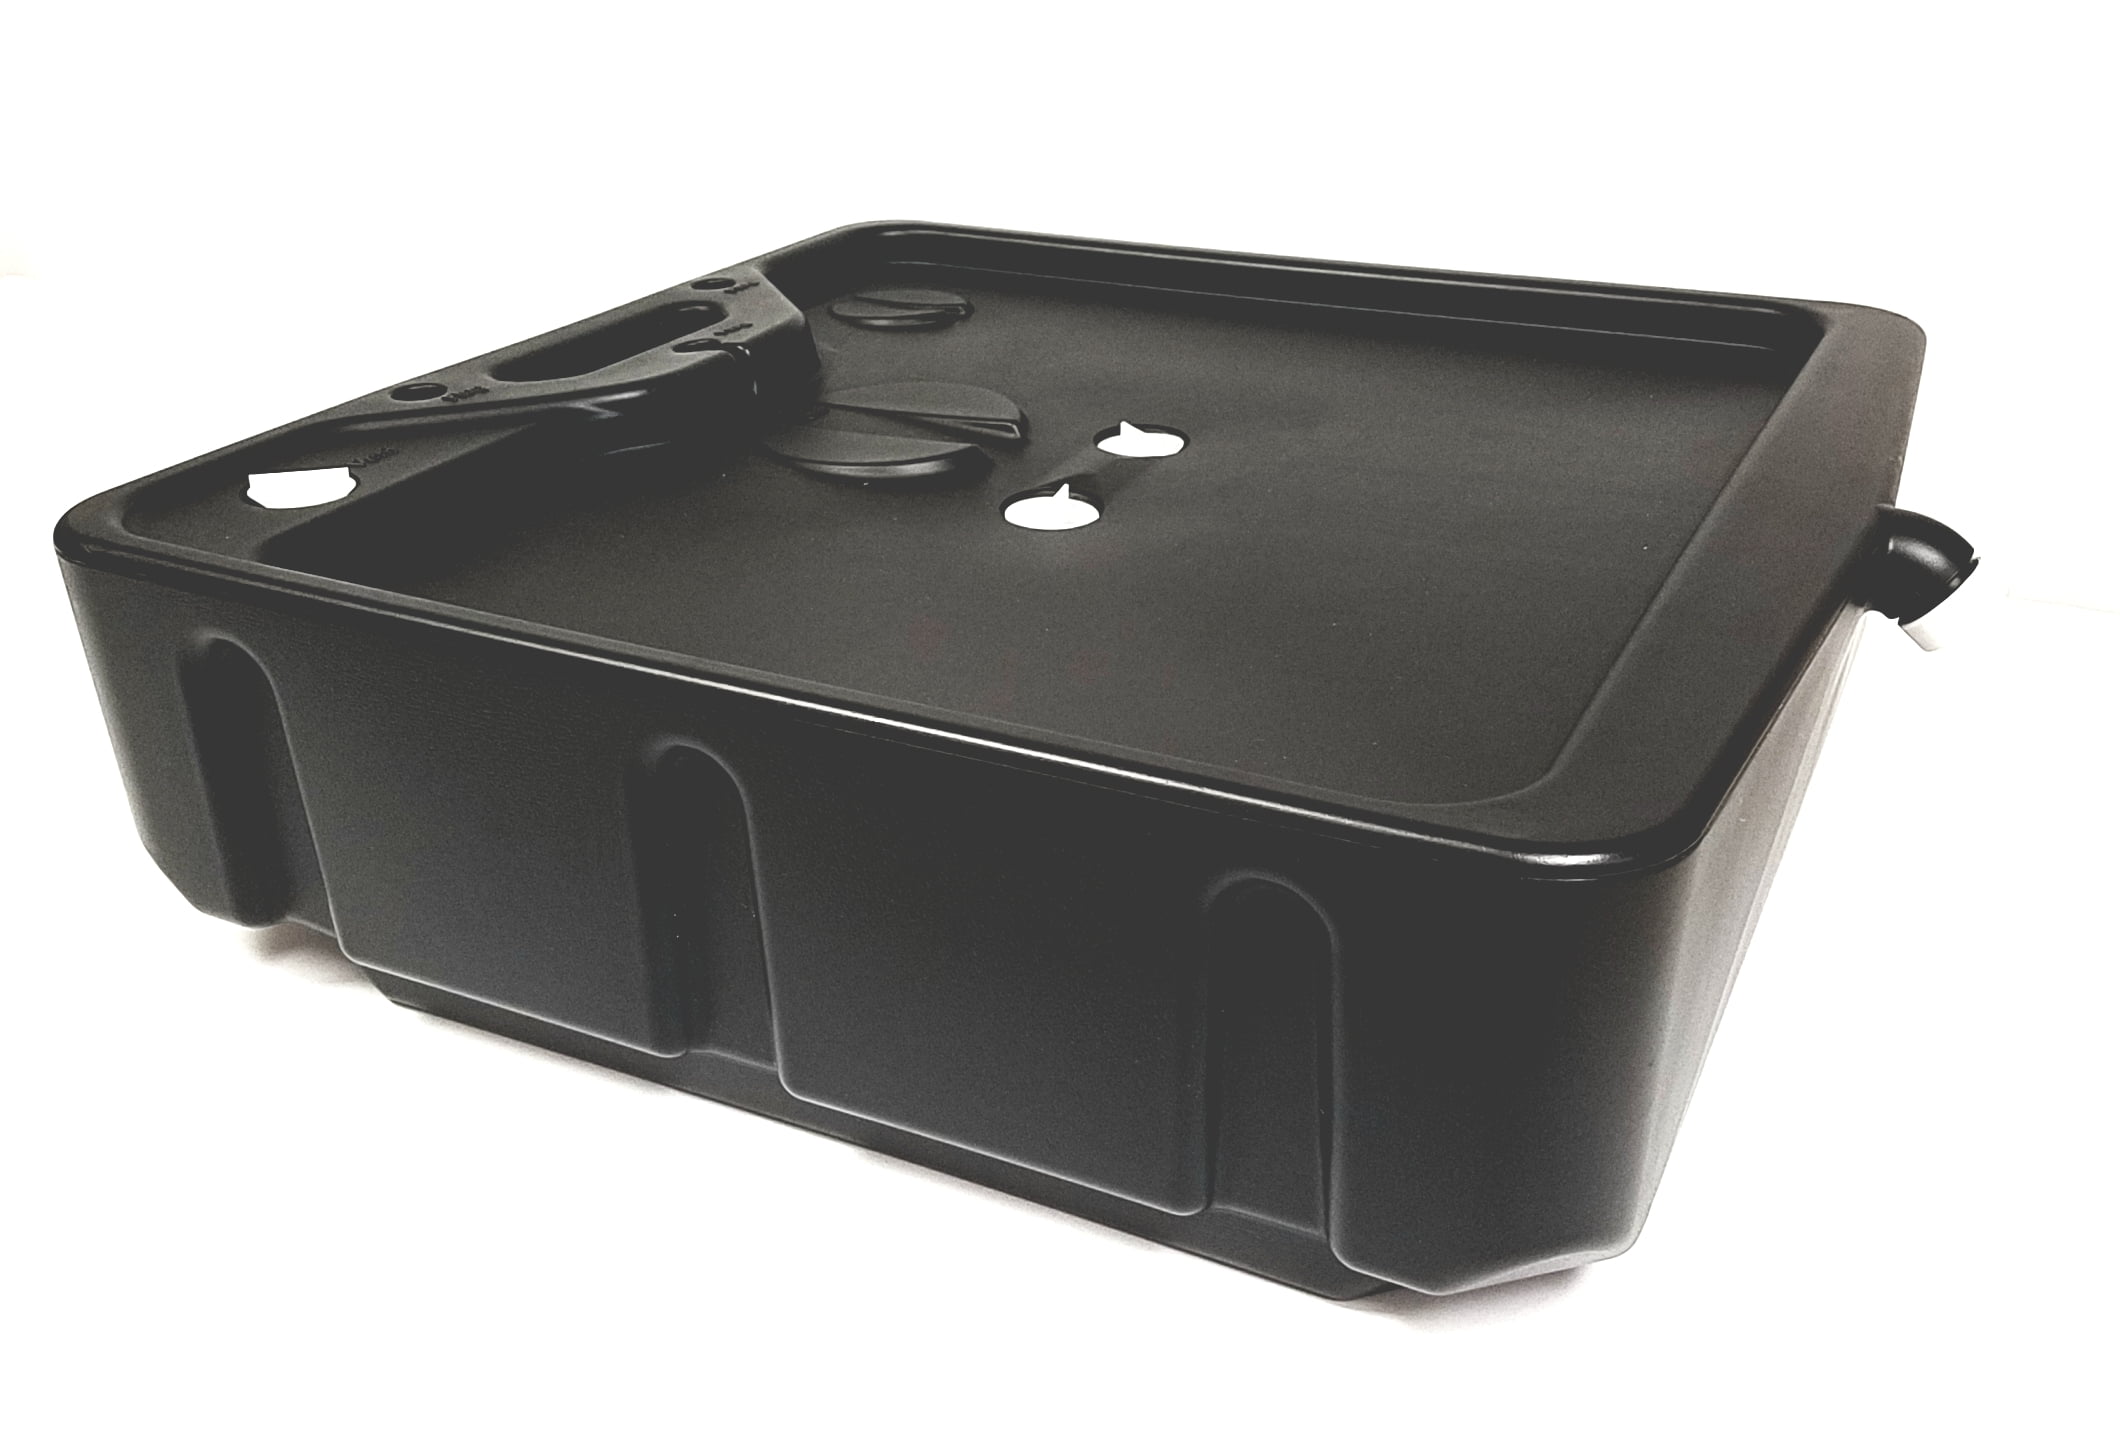 Hyper Tough 23 Qt. Low Profile Drain Pan Fits Easily Under Any Car or Truck